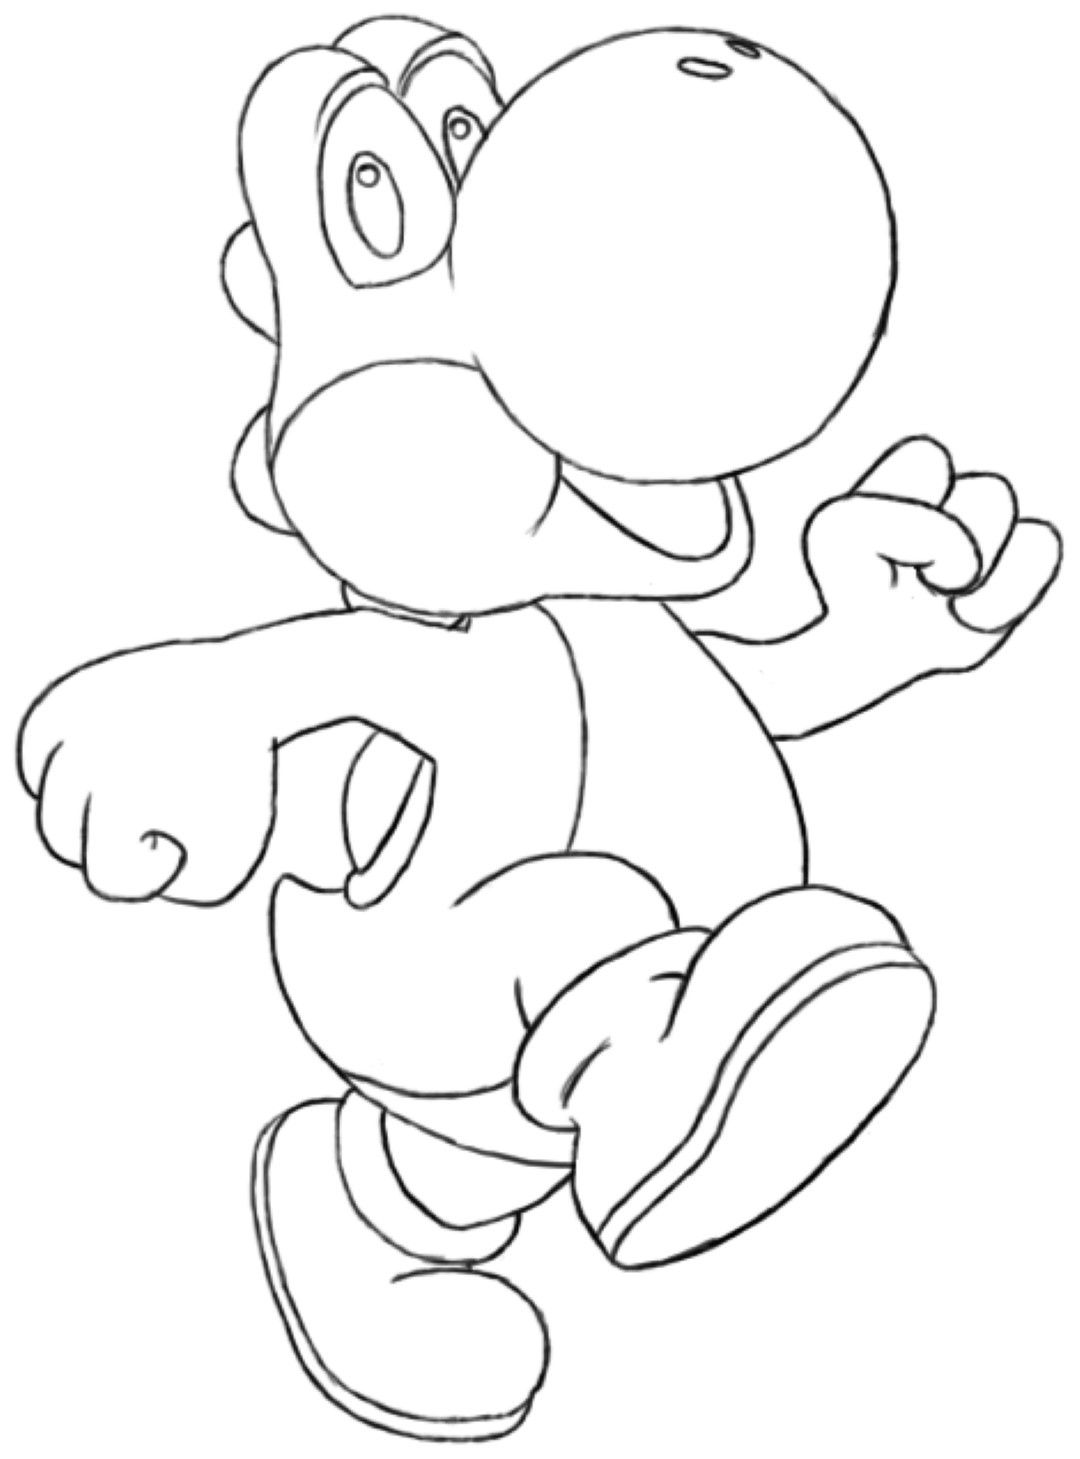 Yoshi Coloring Pages Pdf For Kids - Free Printable Yoshi Coloring Pages